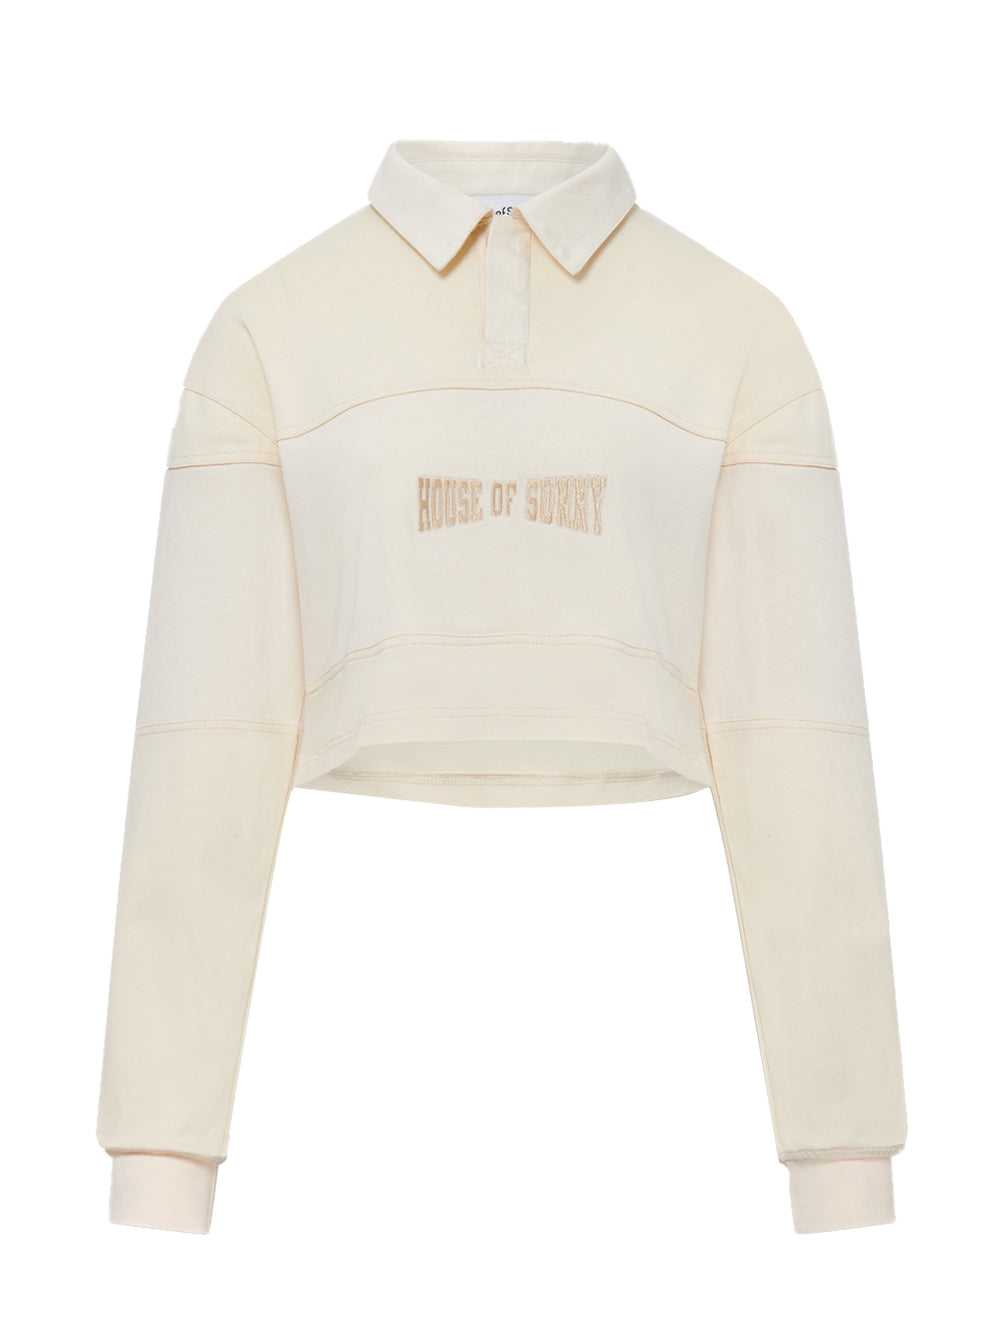 Cropped Rugby Shirt W/ Hos Embroidery Multi